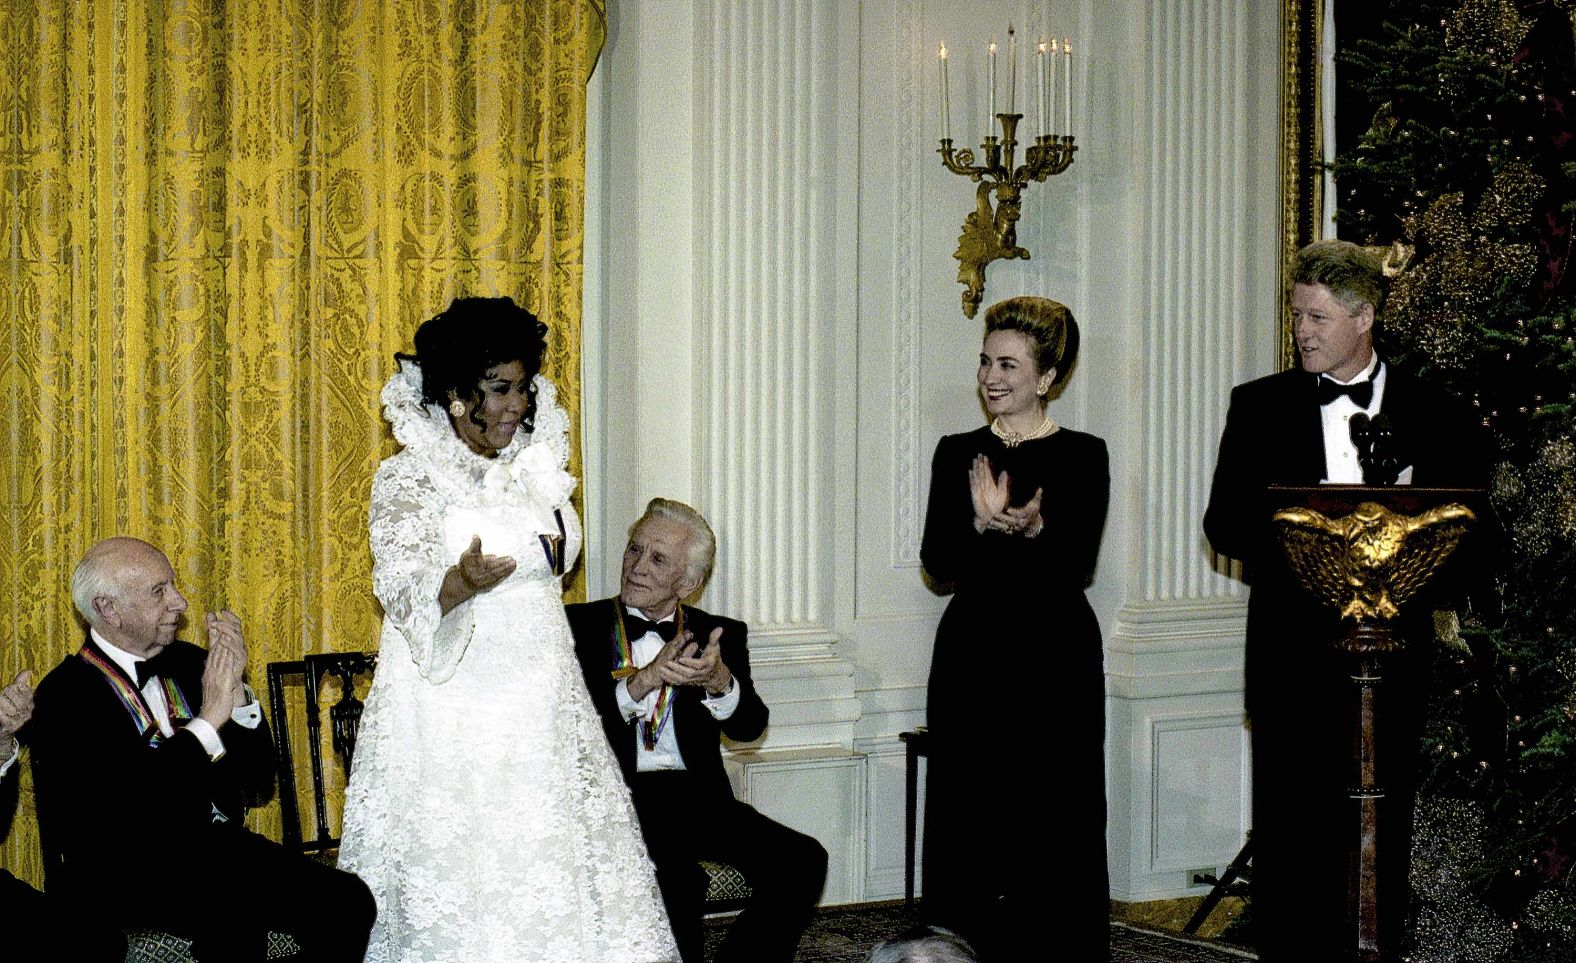 Franklin became the youngest Kennedy Center Honors Awards recipient in 1994.